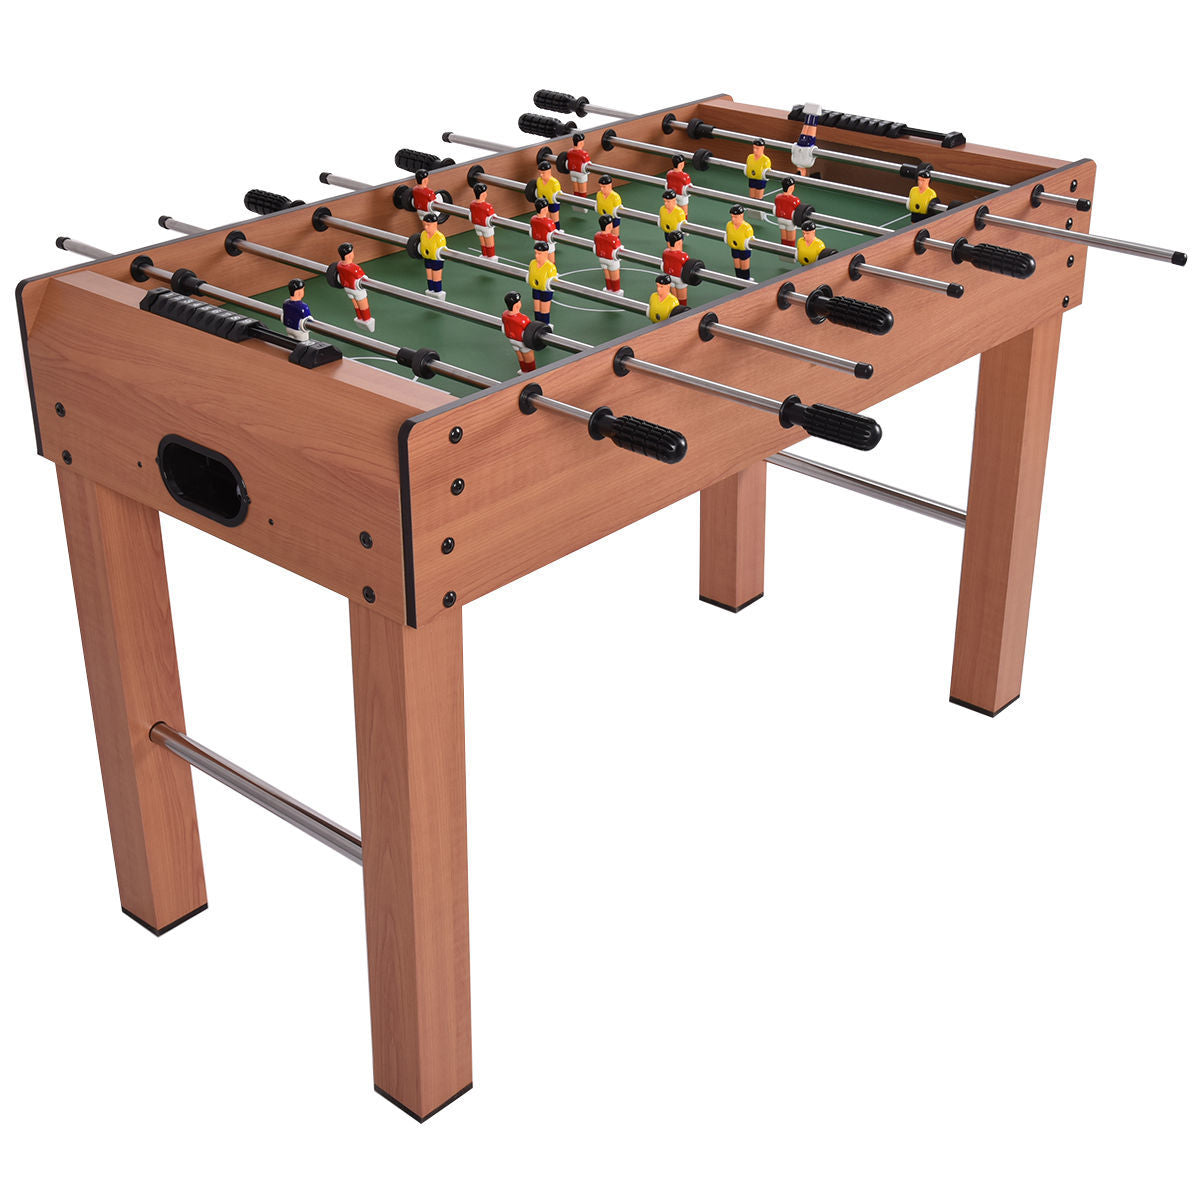 48 Inch Competition Game Foosball Table - Color: Natural